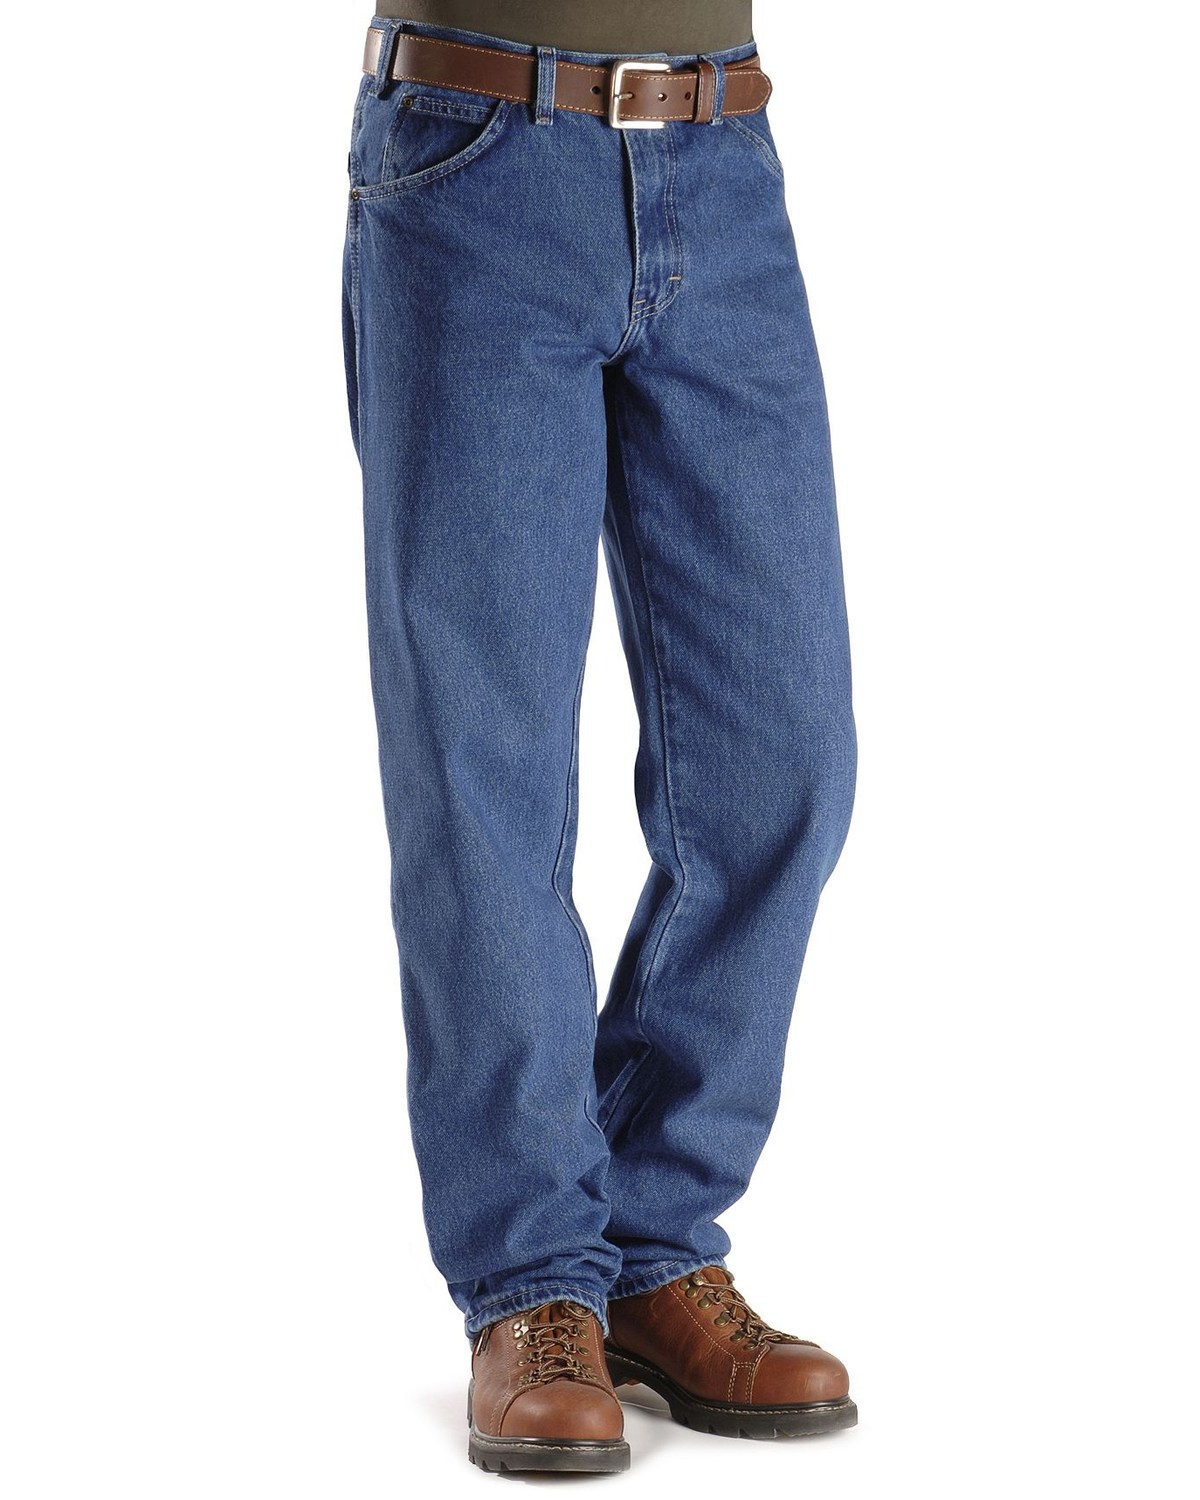 Dickies Jeans - Relaxed Fit Work Jeans | Boot Barn